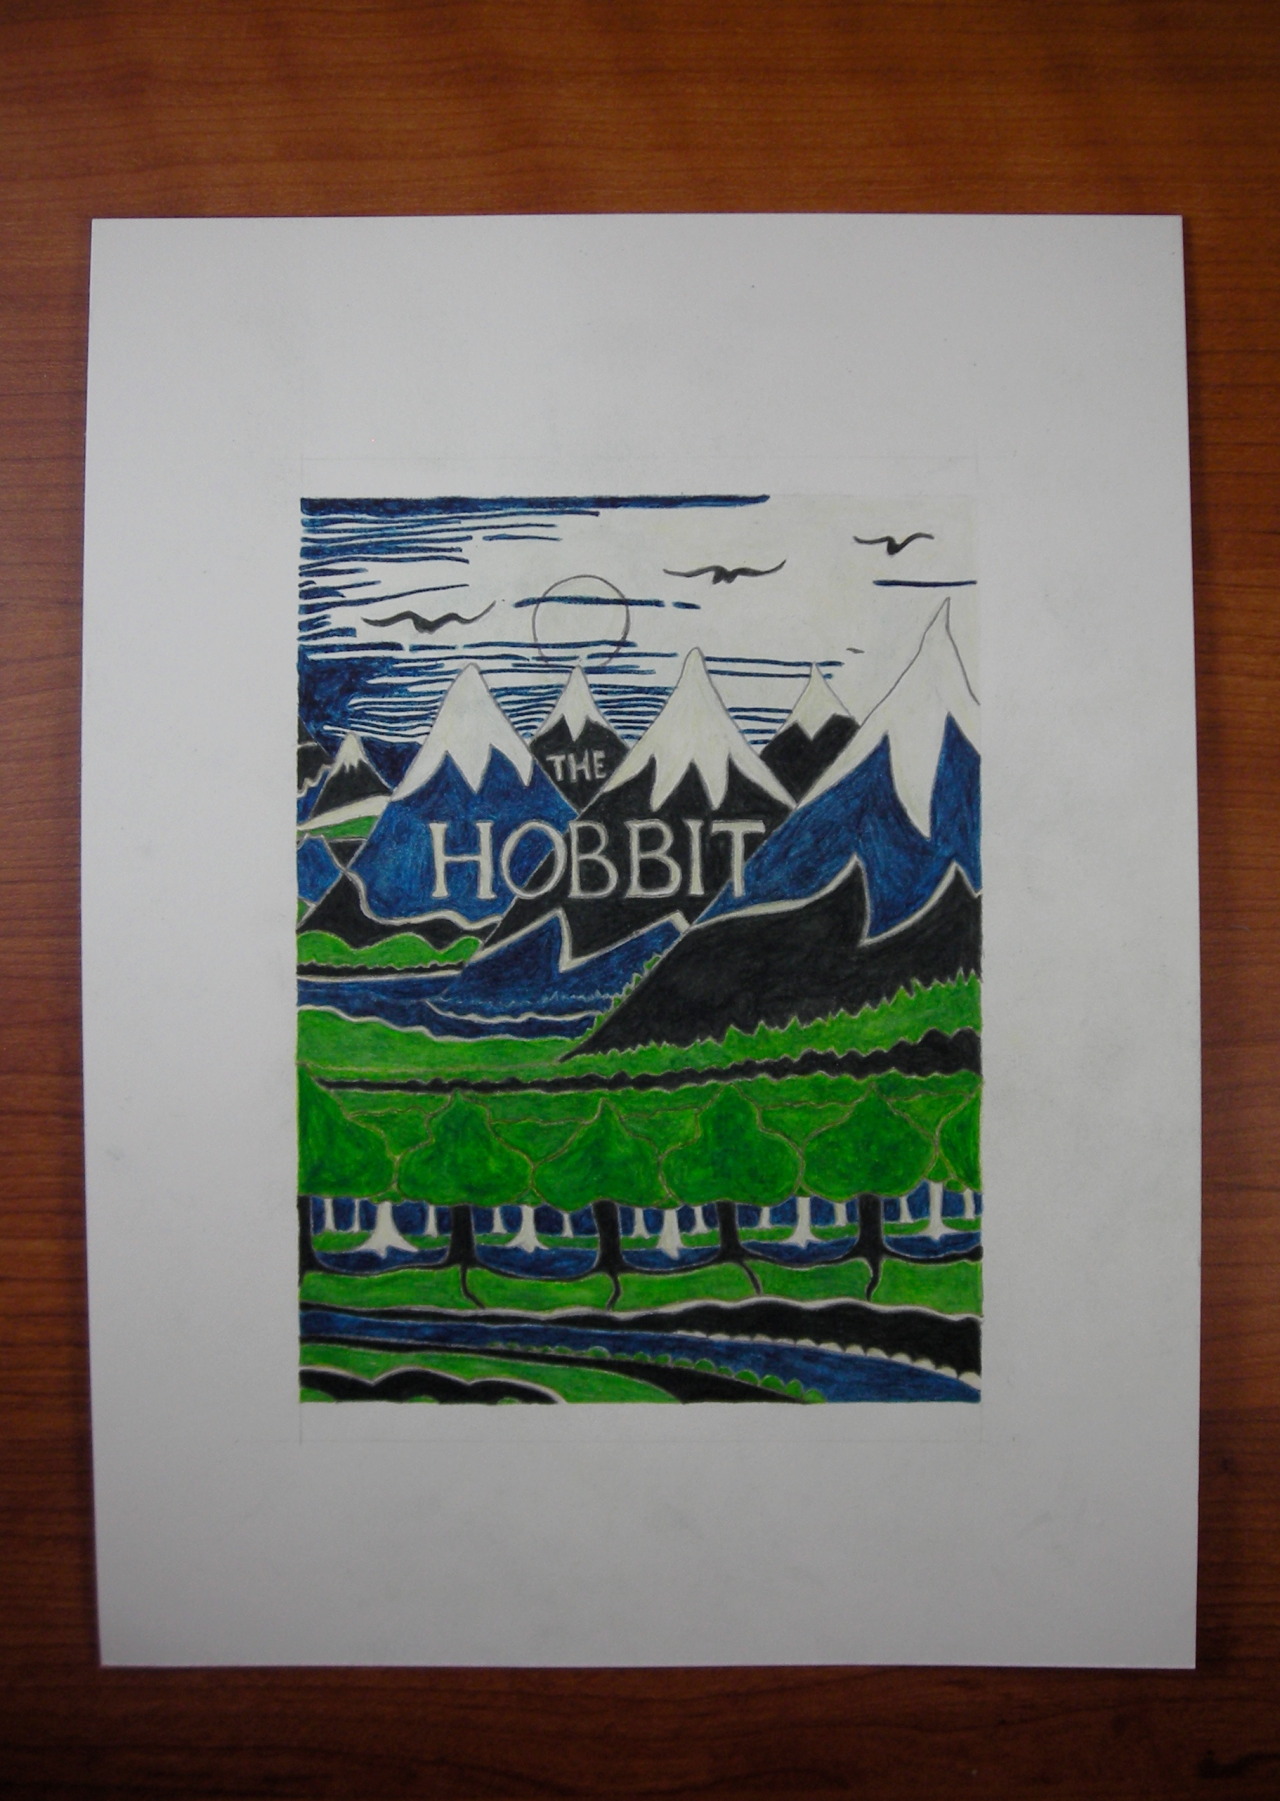 creativeanchorage:
“ Watercolor pencil drawing of the 1937 Hobbit book cover, illustrated by Tolkien.
”
I’ve been searching for an illustration of a similar style to draw and can’t find anything.